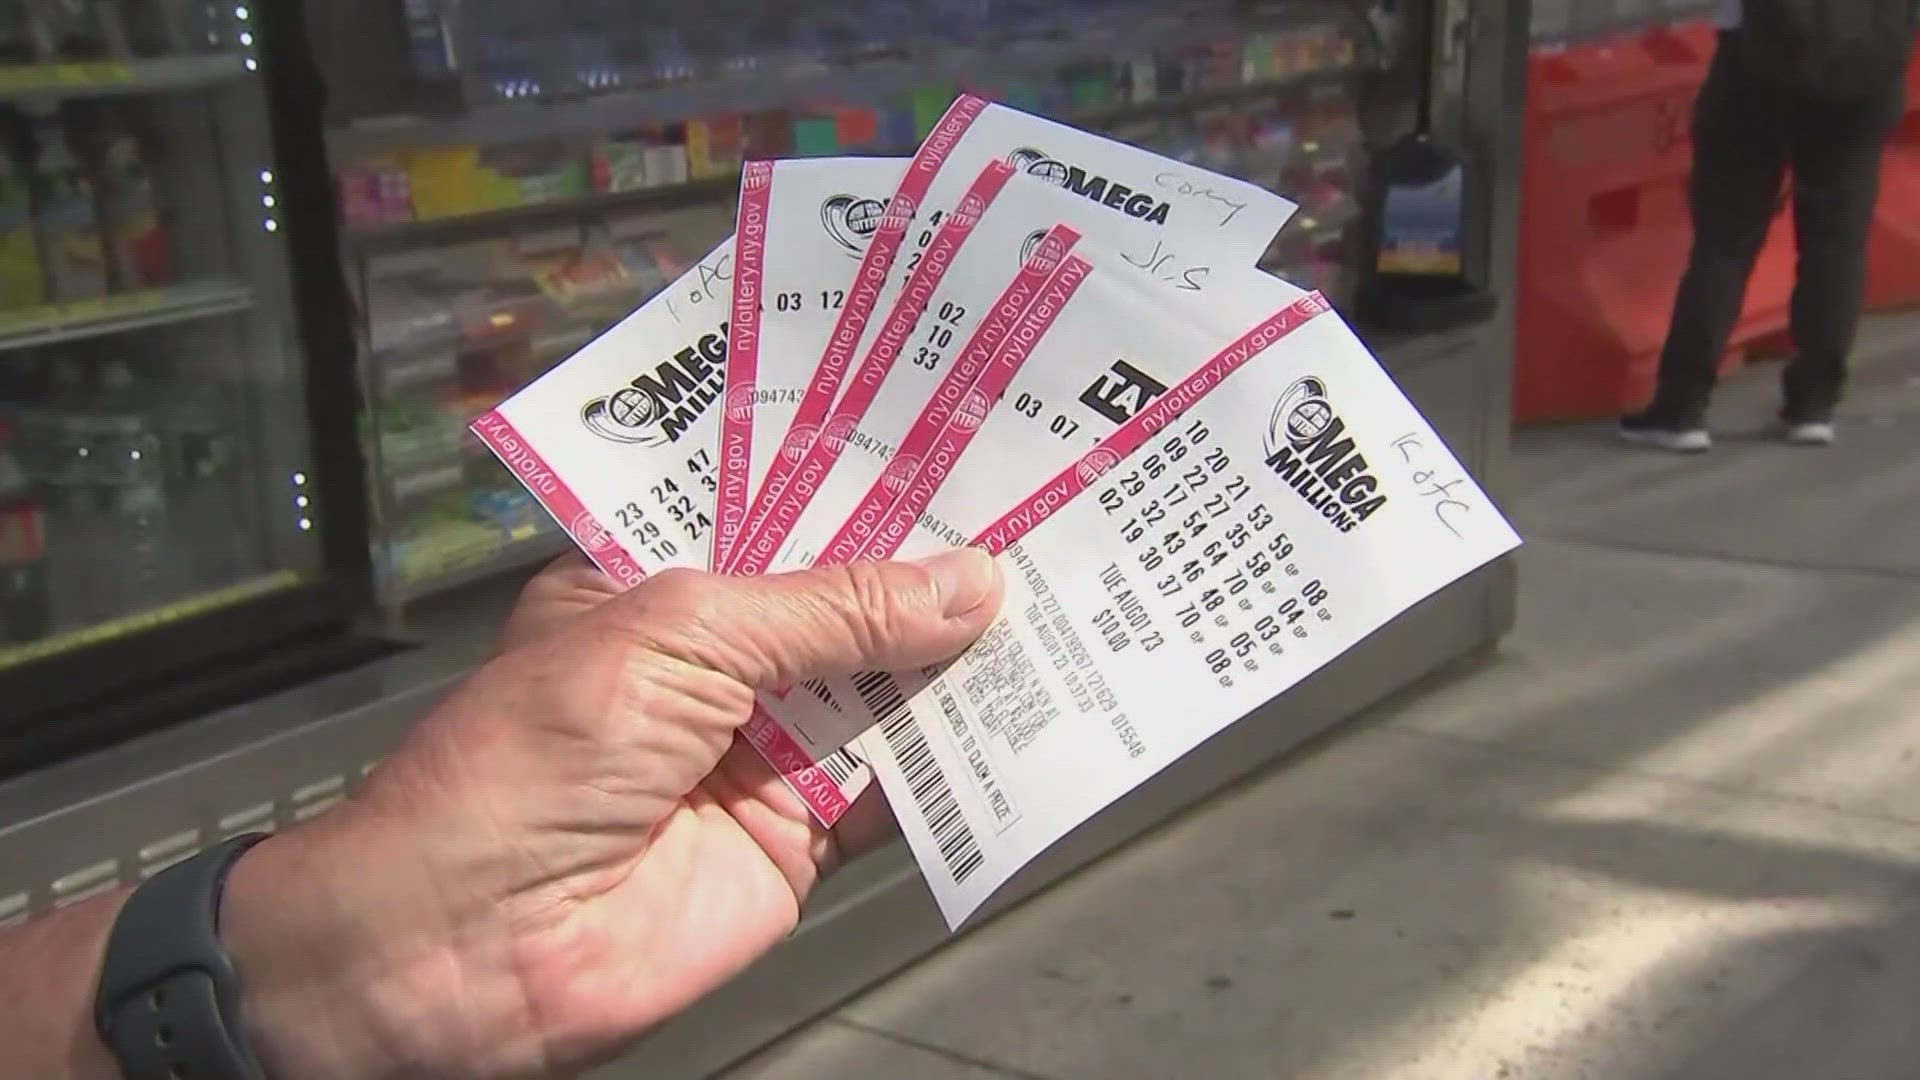 Lottery excitement is swirling across the country as the Mega Millions jackpot has now soared to nearly $1 billion for the next drawing on Friday, March 22.